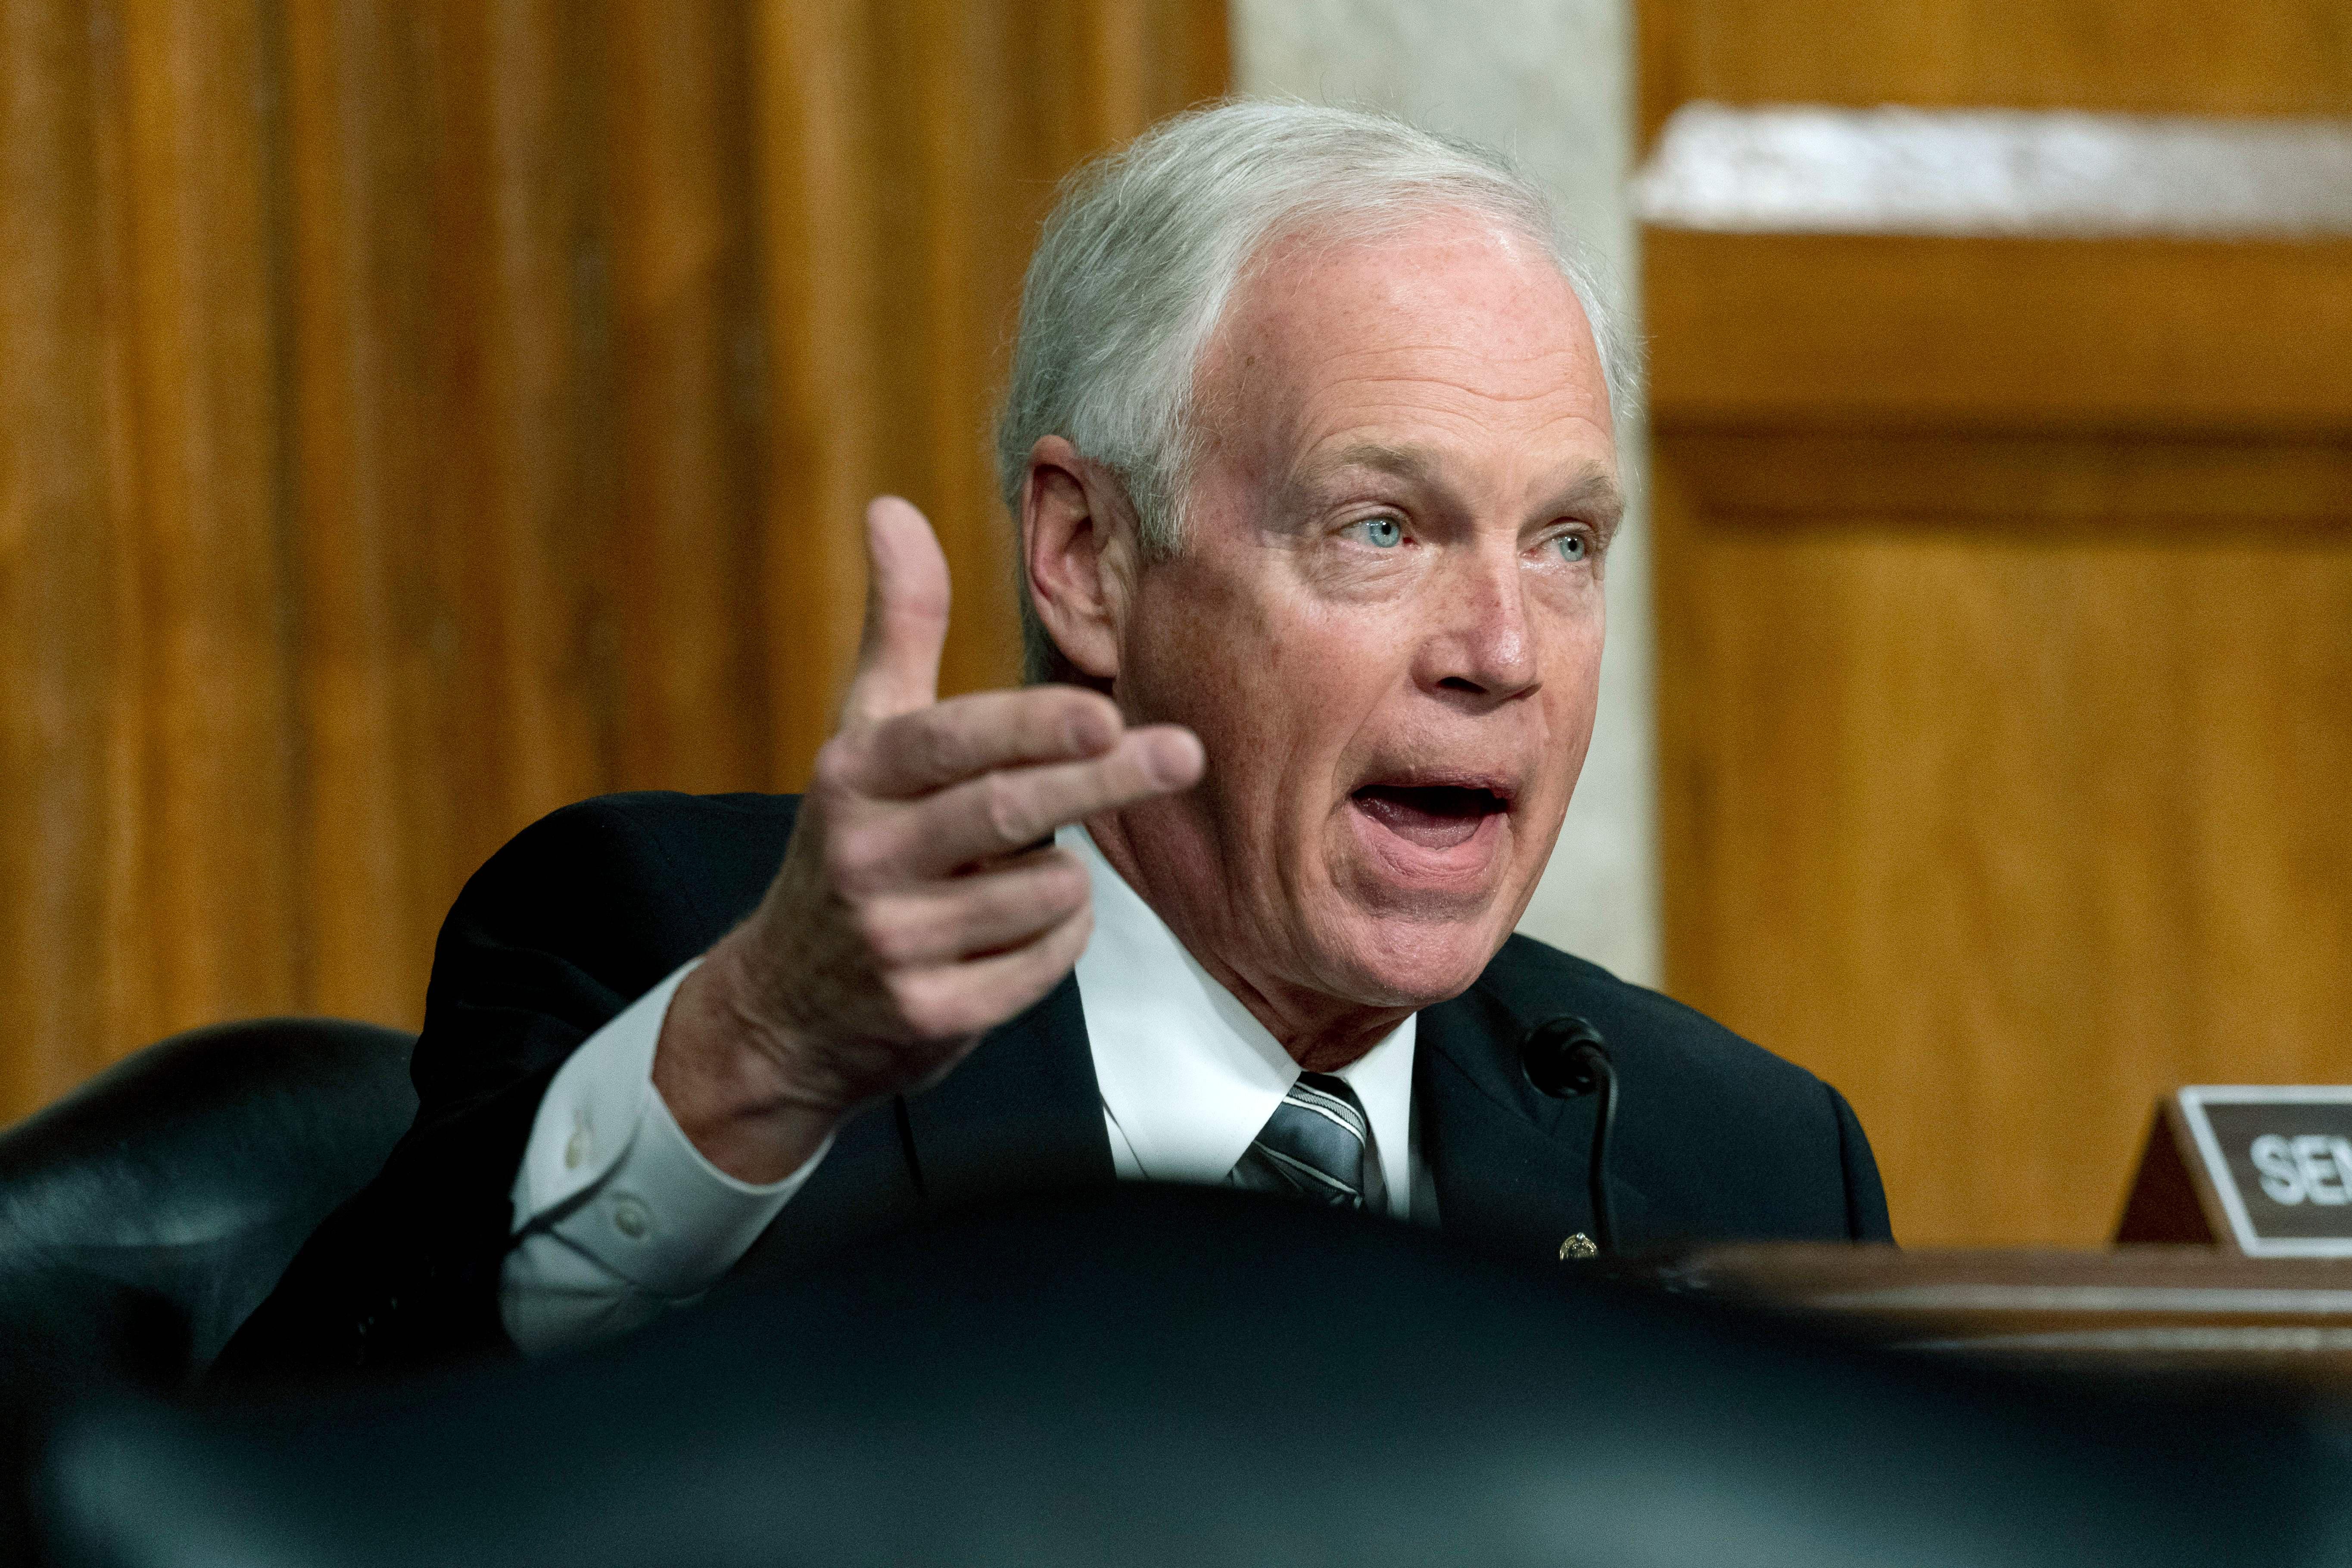 Ron Johnson gestures while speaking in a hearing.